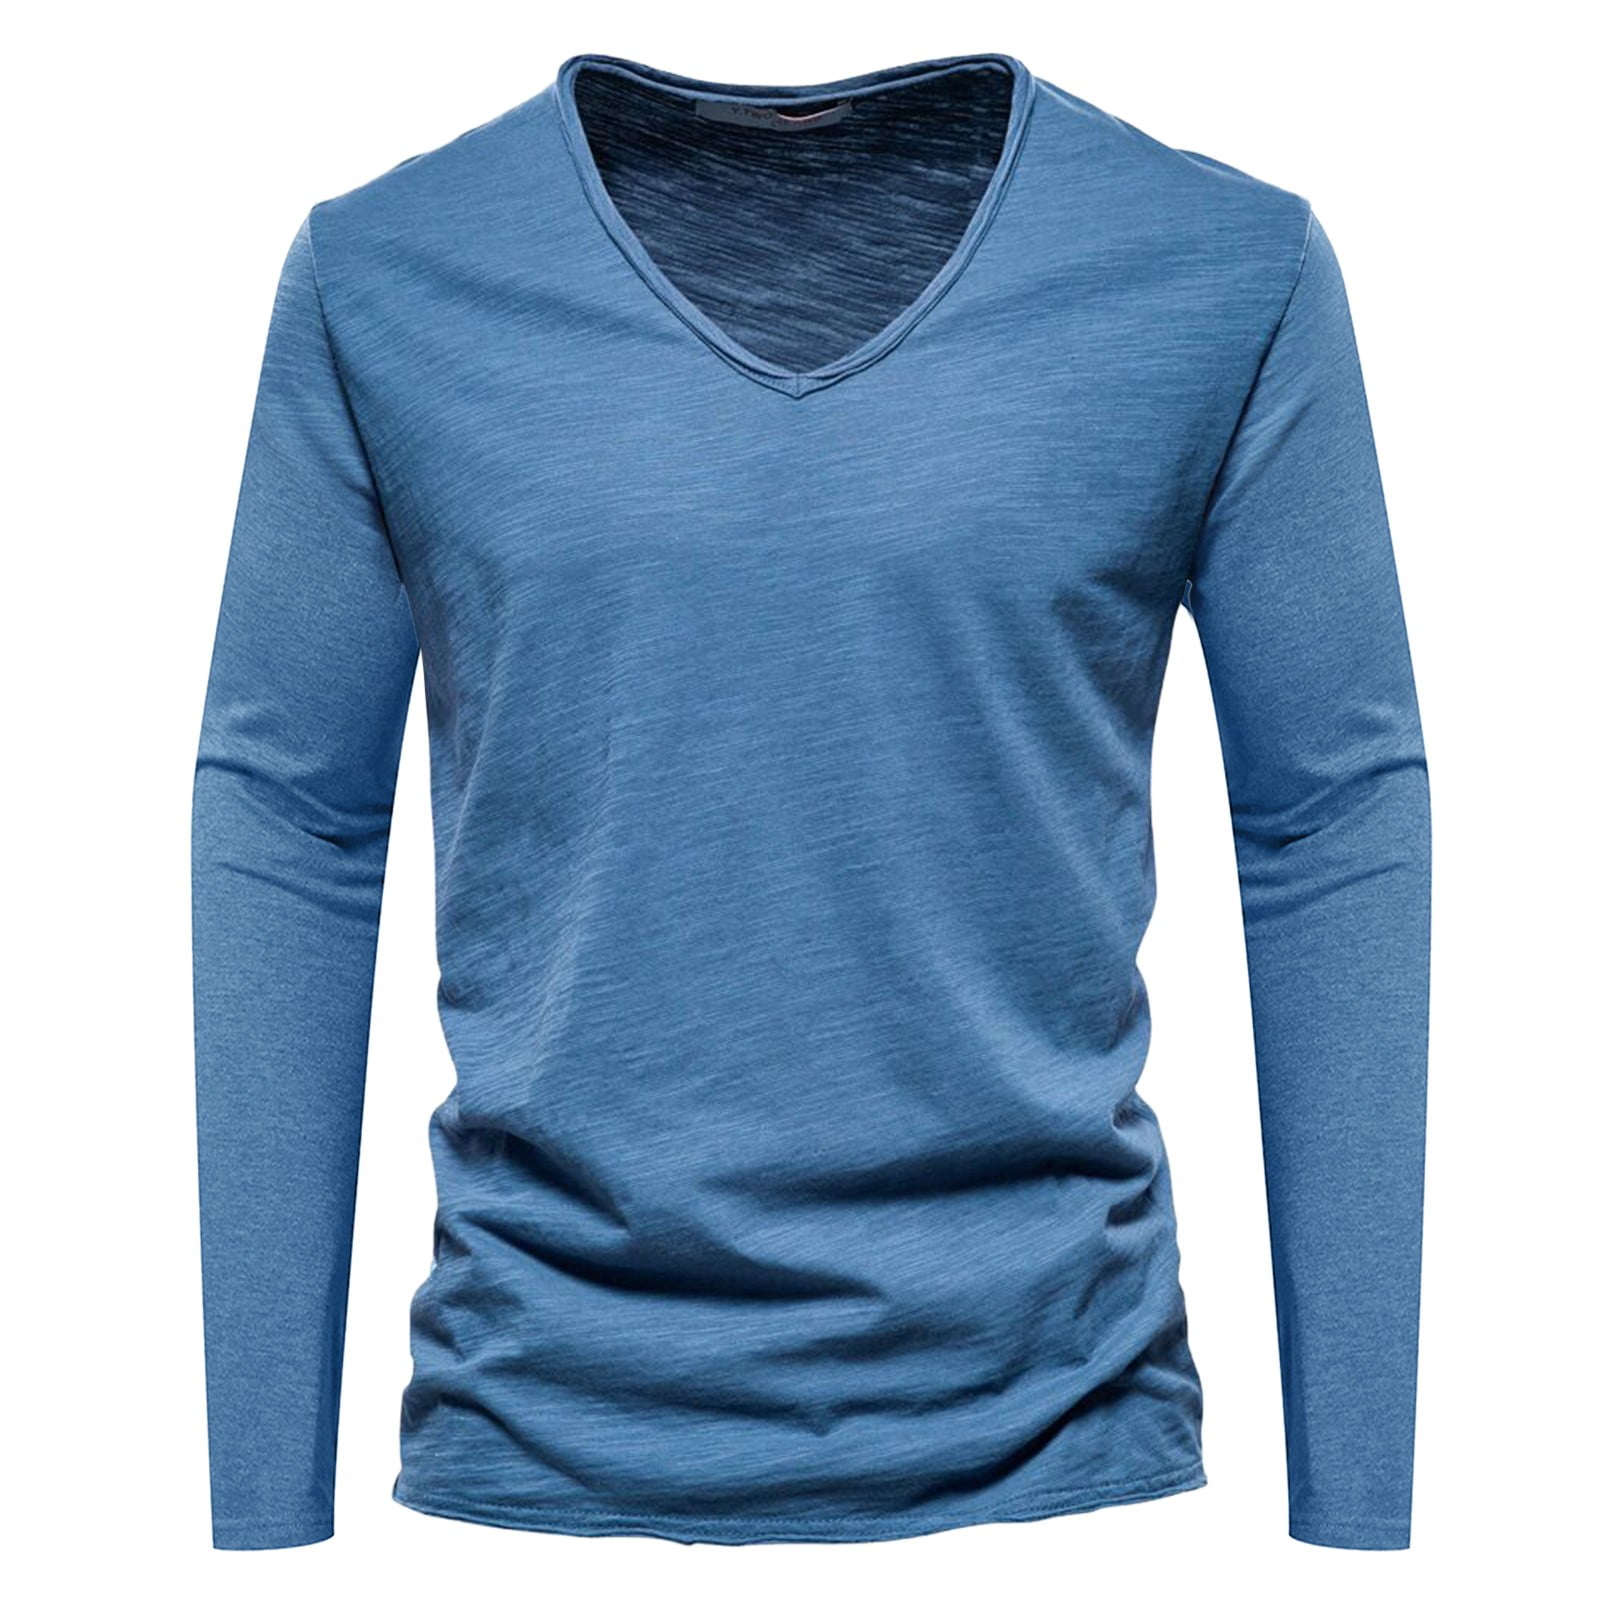 Shirts for Men Fashion Casual Solid Color Cotton V Neck Long Sleeve T ...